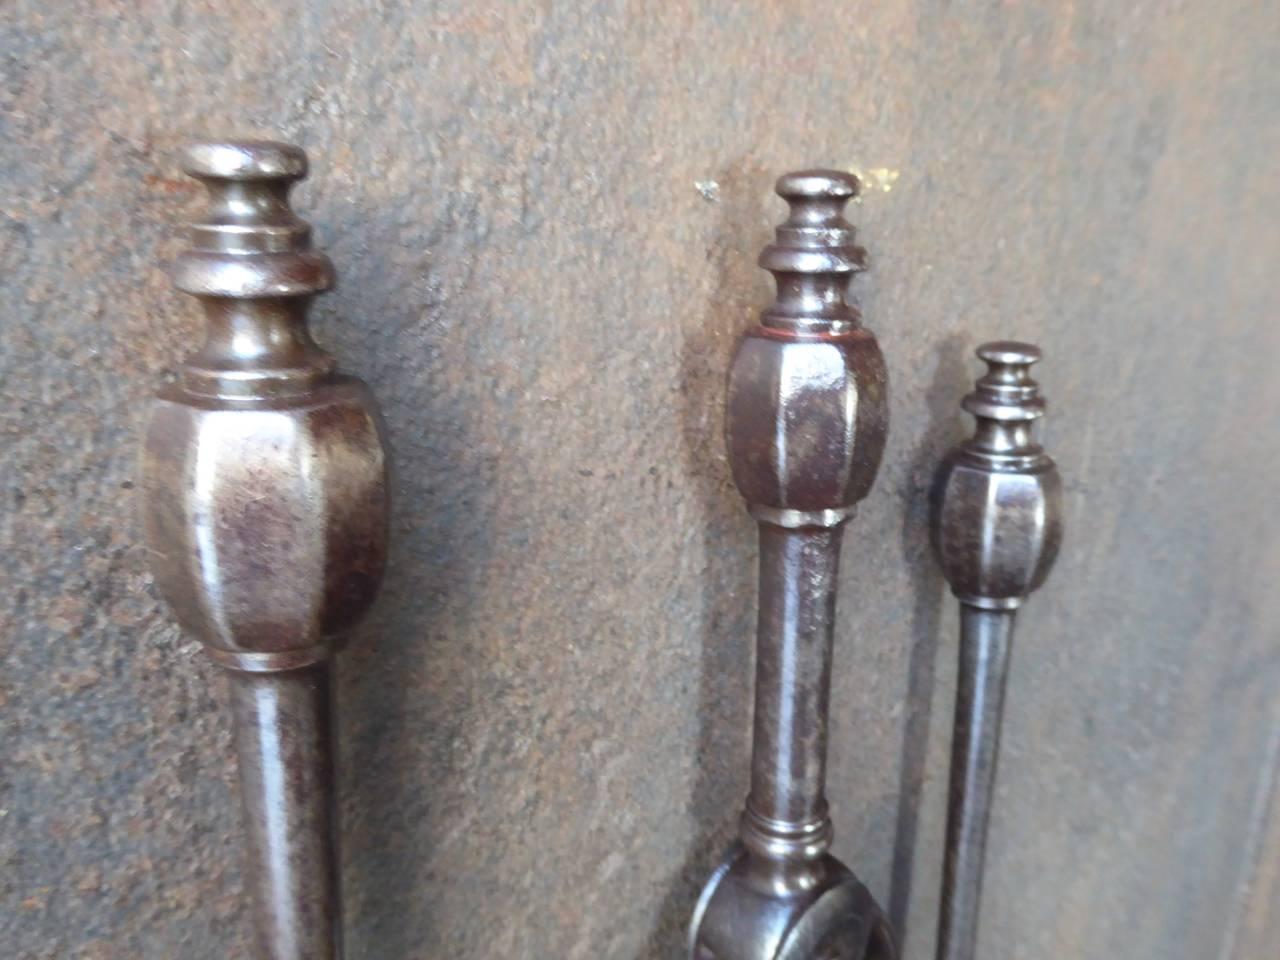 19th century English fireplace tools, fire irons made of wrought iron, polished copper and bronze.

We have a unique and specialized collection of antique and used fireplace accessories consisting of more than 1000 listings at 1stdibs. Amongst